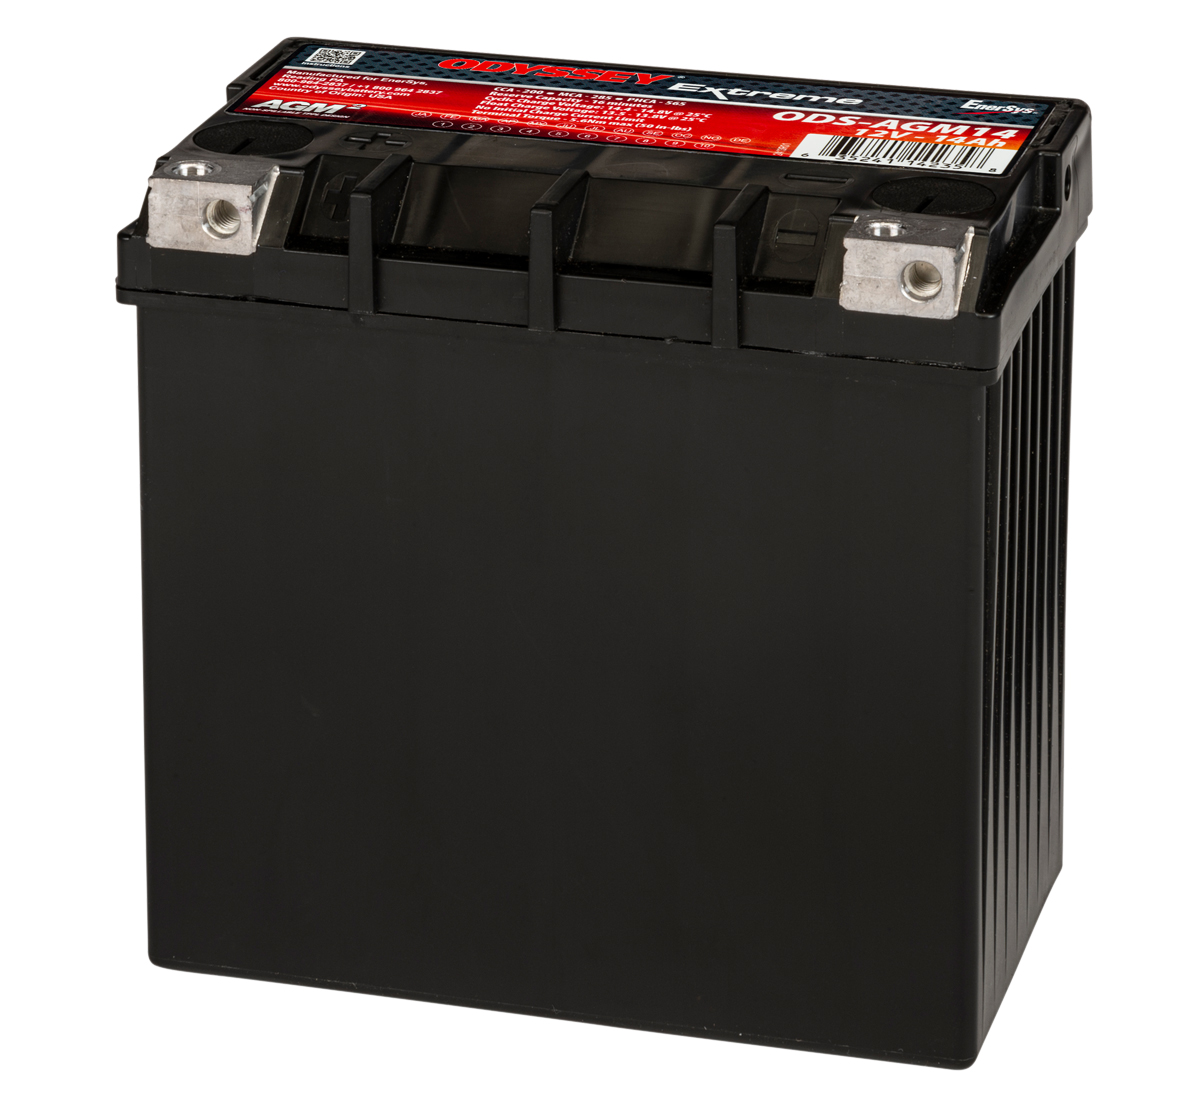 Odyssey ODS-AGM14 Extreme AGM Motorcycle Battery